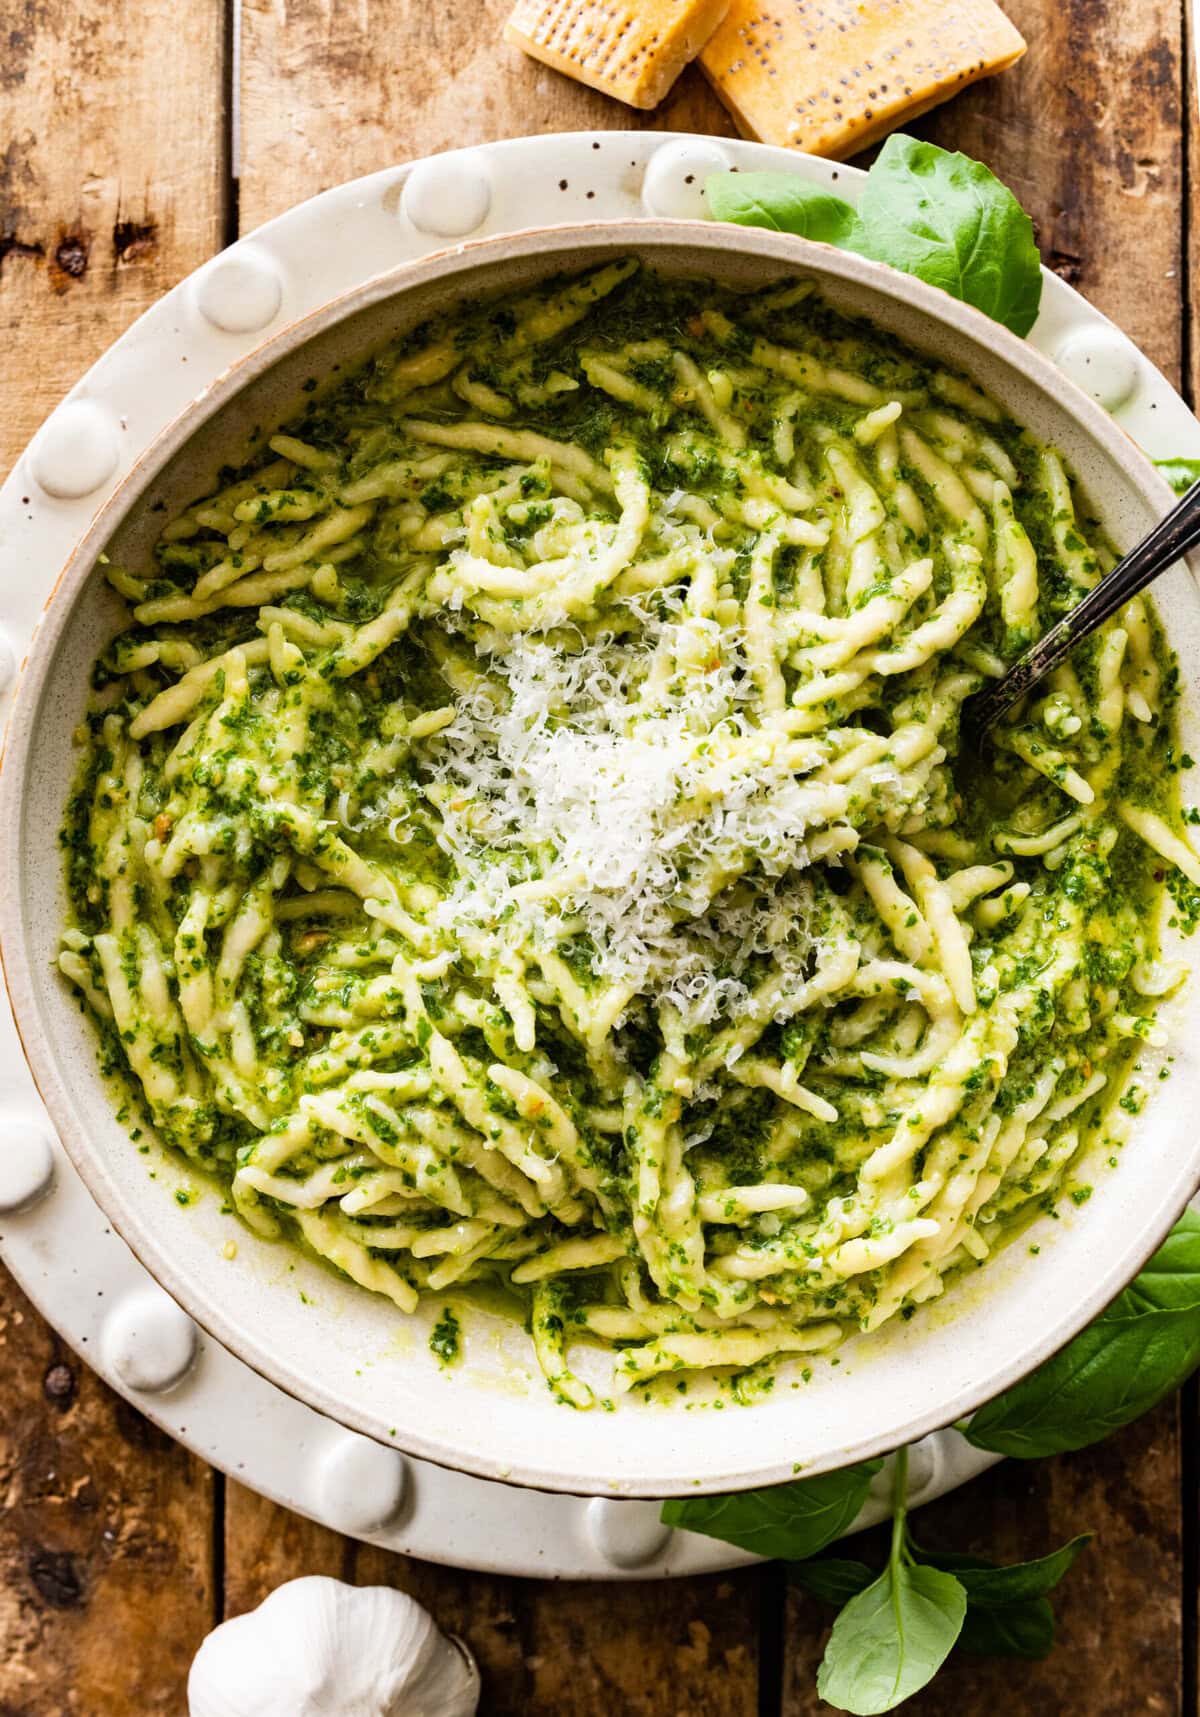 Basil pesto tossed with trofie pasta. Served with parmigiano on top.